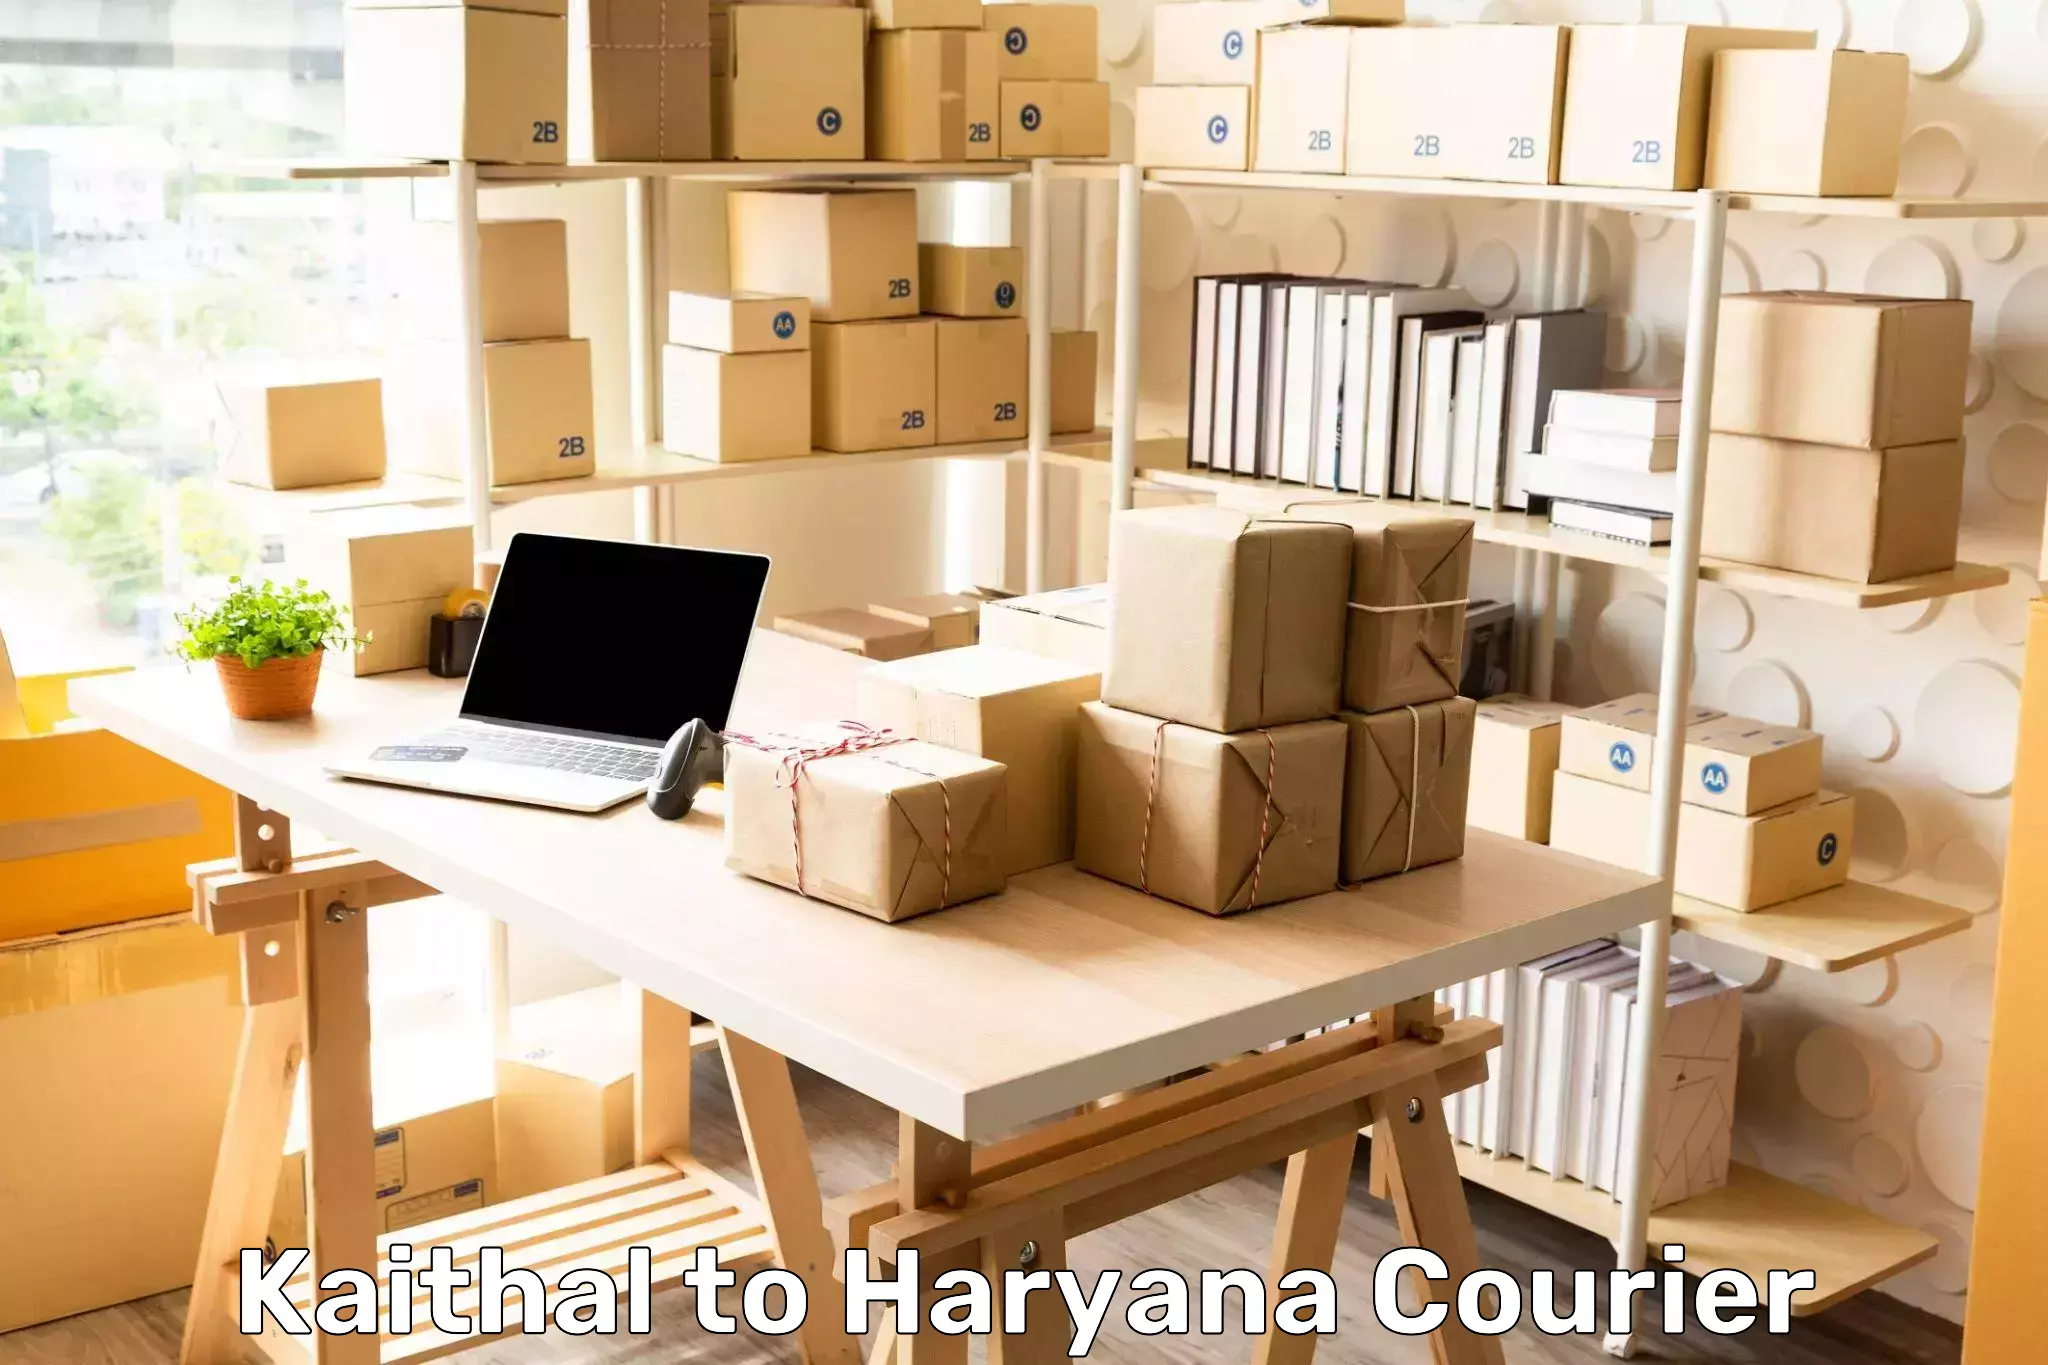 Reliable delivery network Kaithal to NCR Haryana